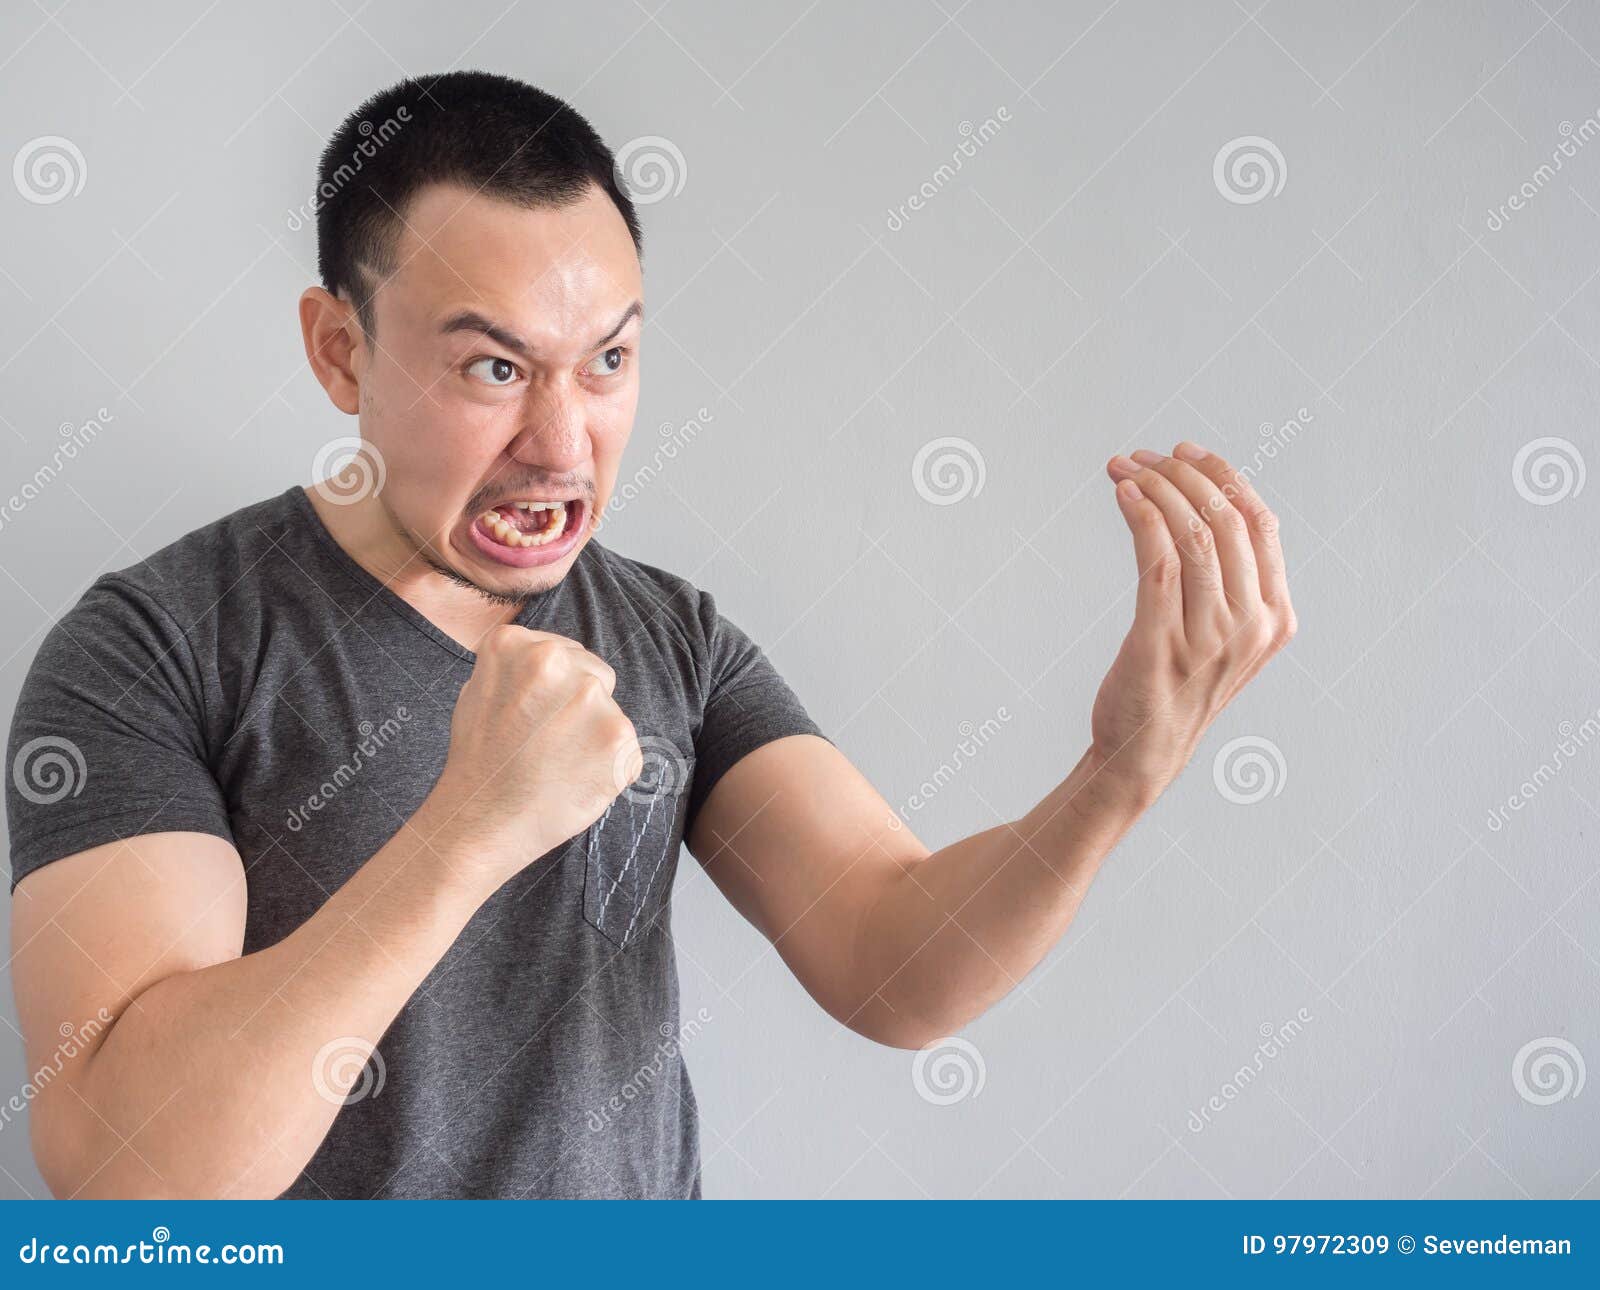 9,099 Angry Funny Mad Stock Photos - Free & Royalty-Free Stock Photos from  Dreamstime